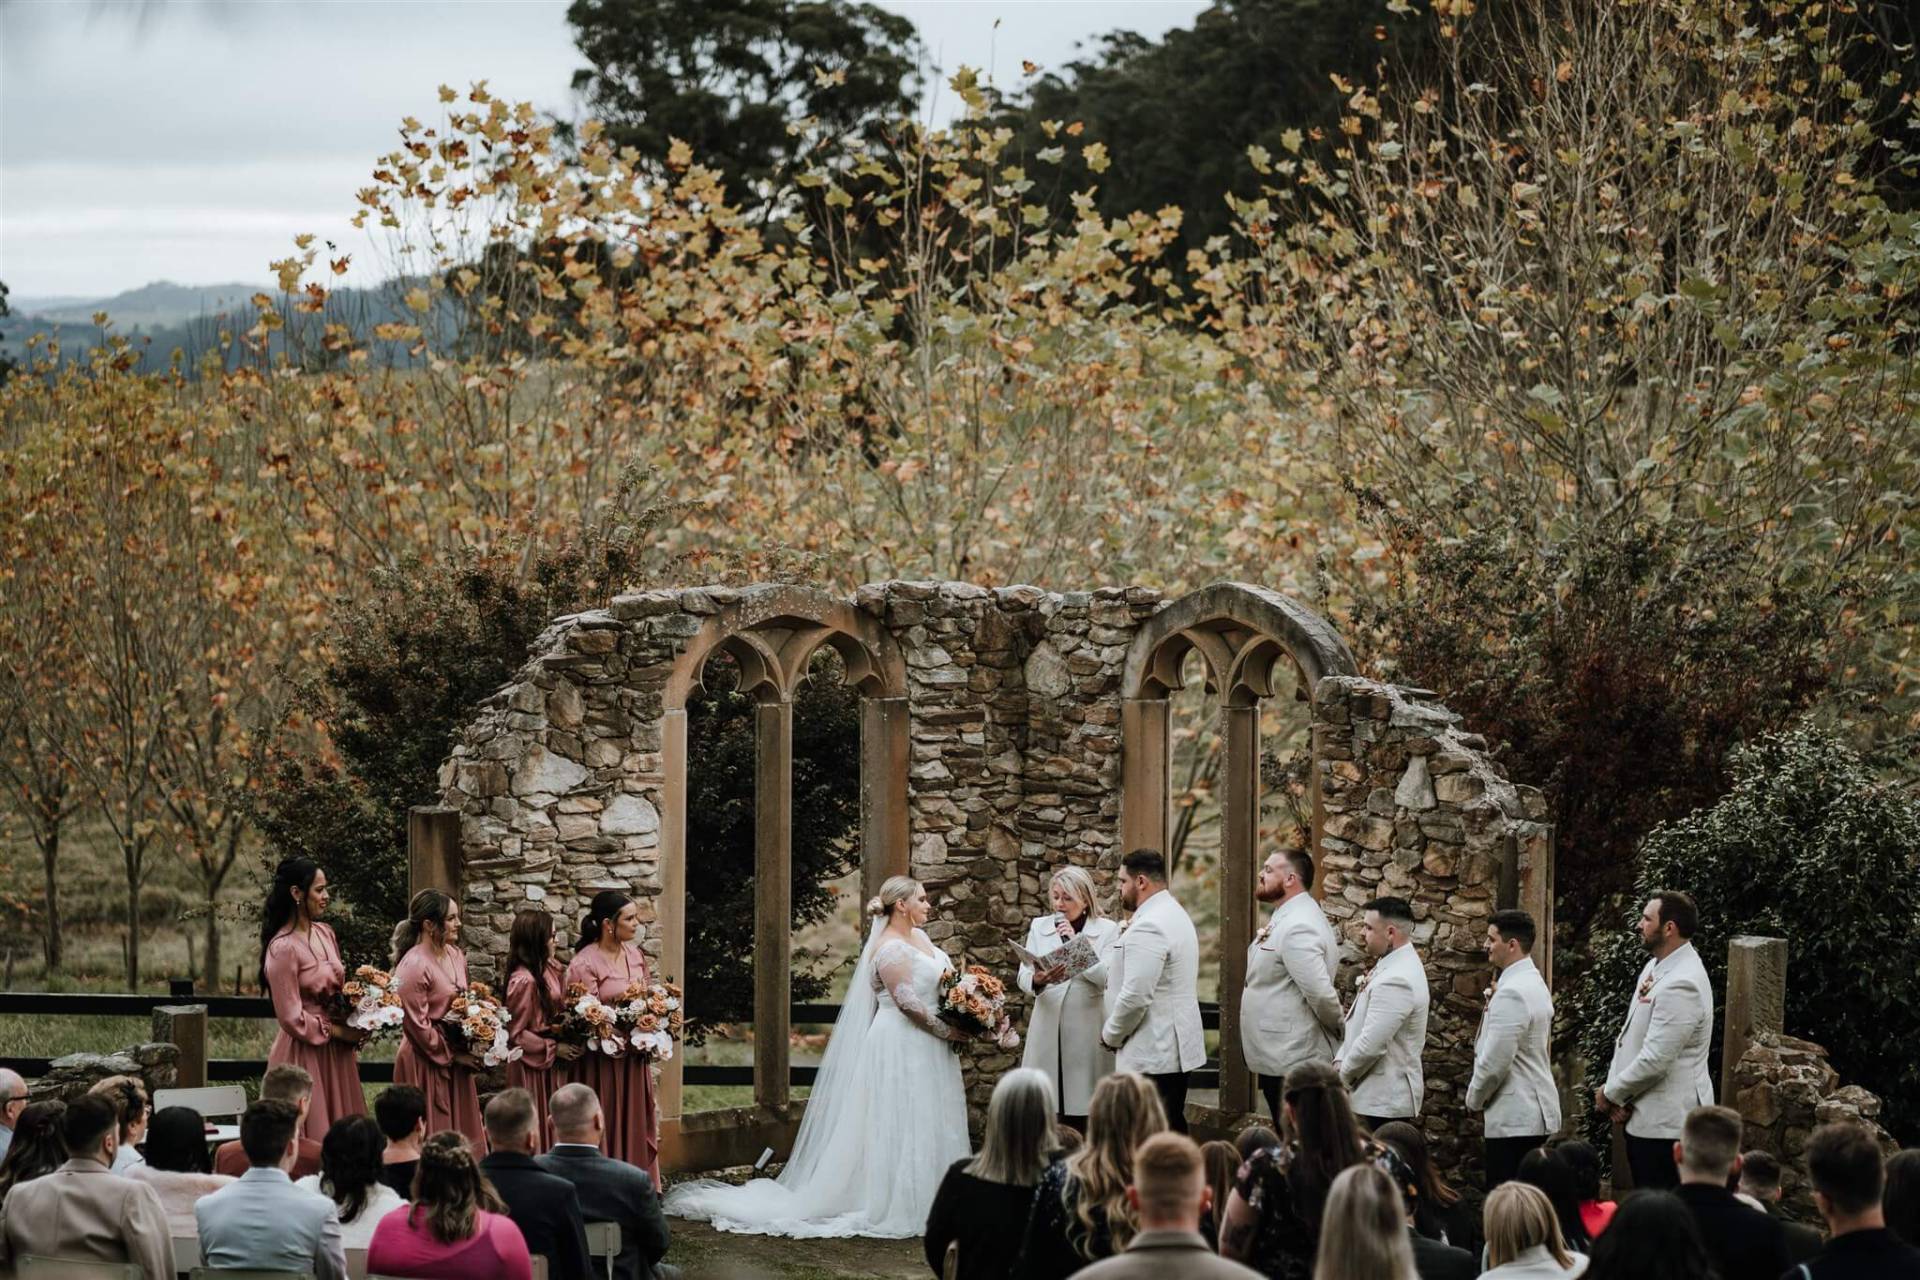 wedding ceremony vows at stone arch altar, surrounded by bridesmaids in rose dresses and groomsmen in white suits